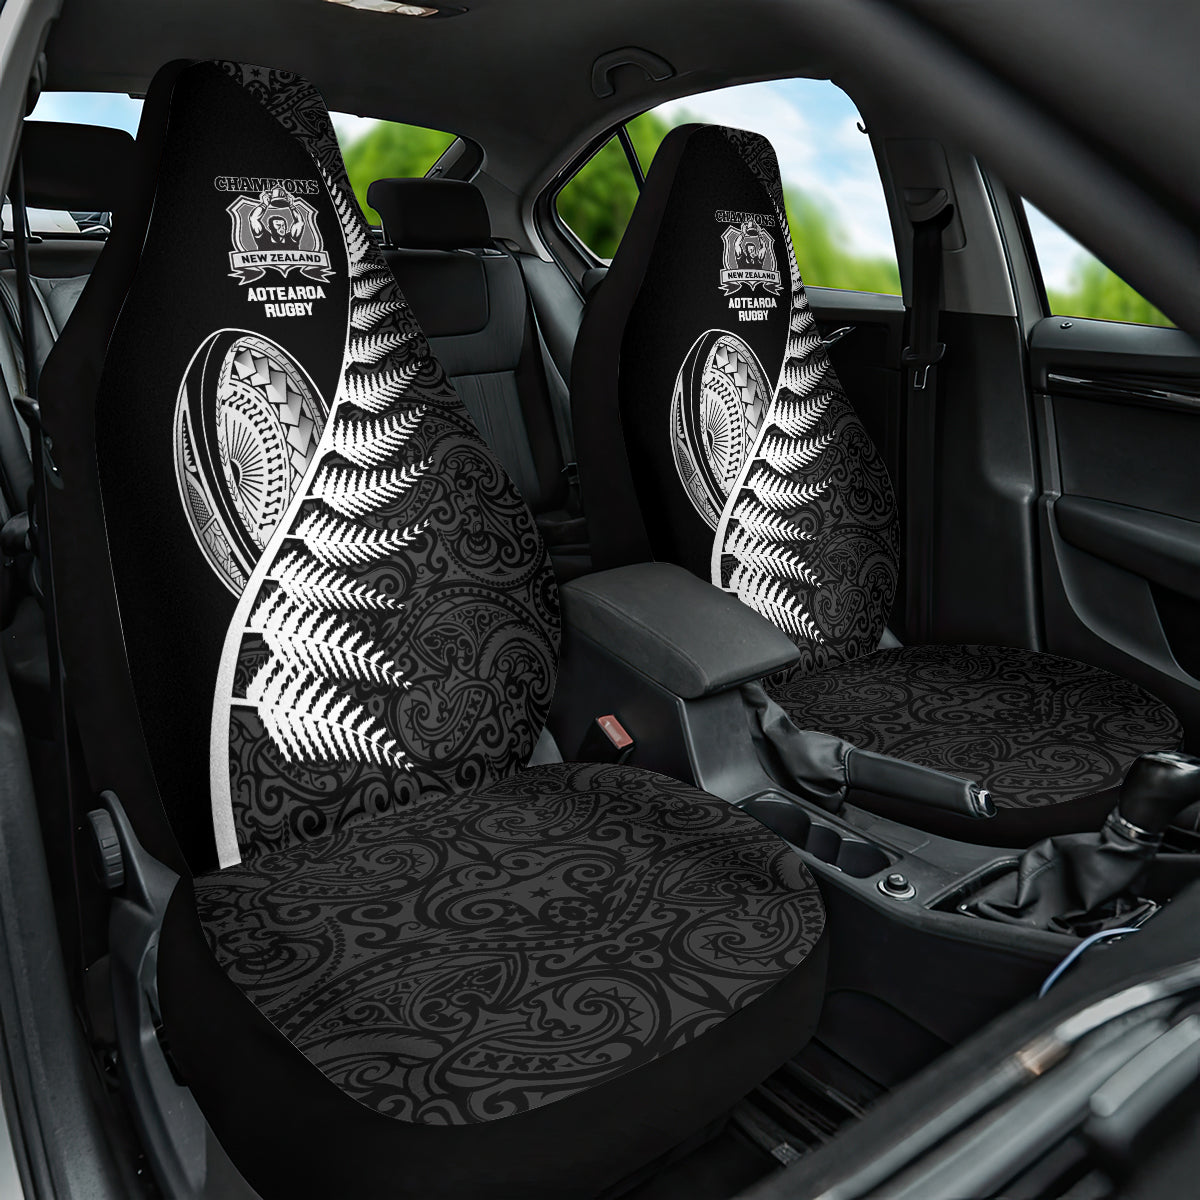 New Zealand World Cup 2023 Car Seat Cover Aotearoa Champion Rugby with Silver Fern Maori Ethnic Pattern LT03 One Size Black - Polynesian Pride